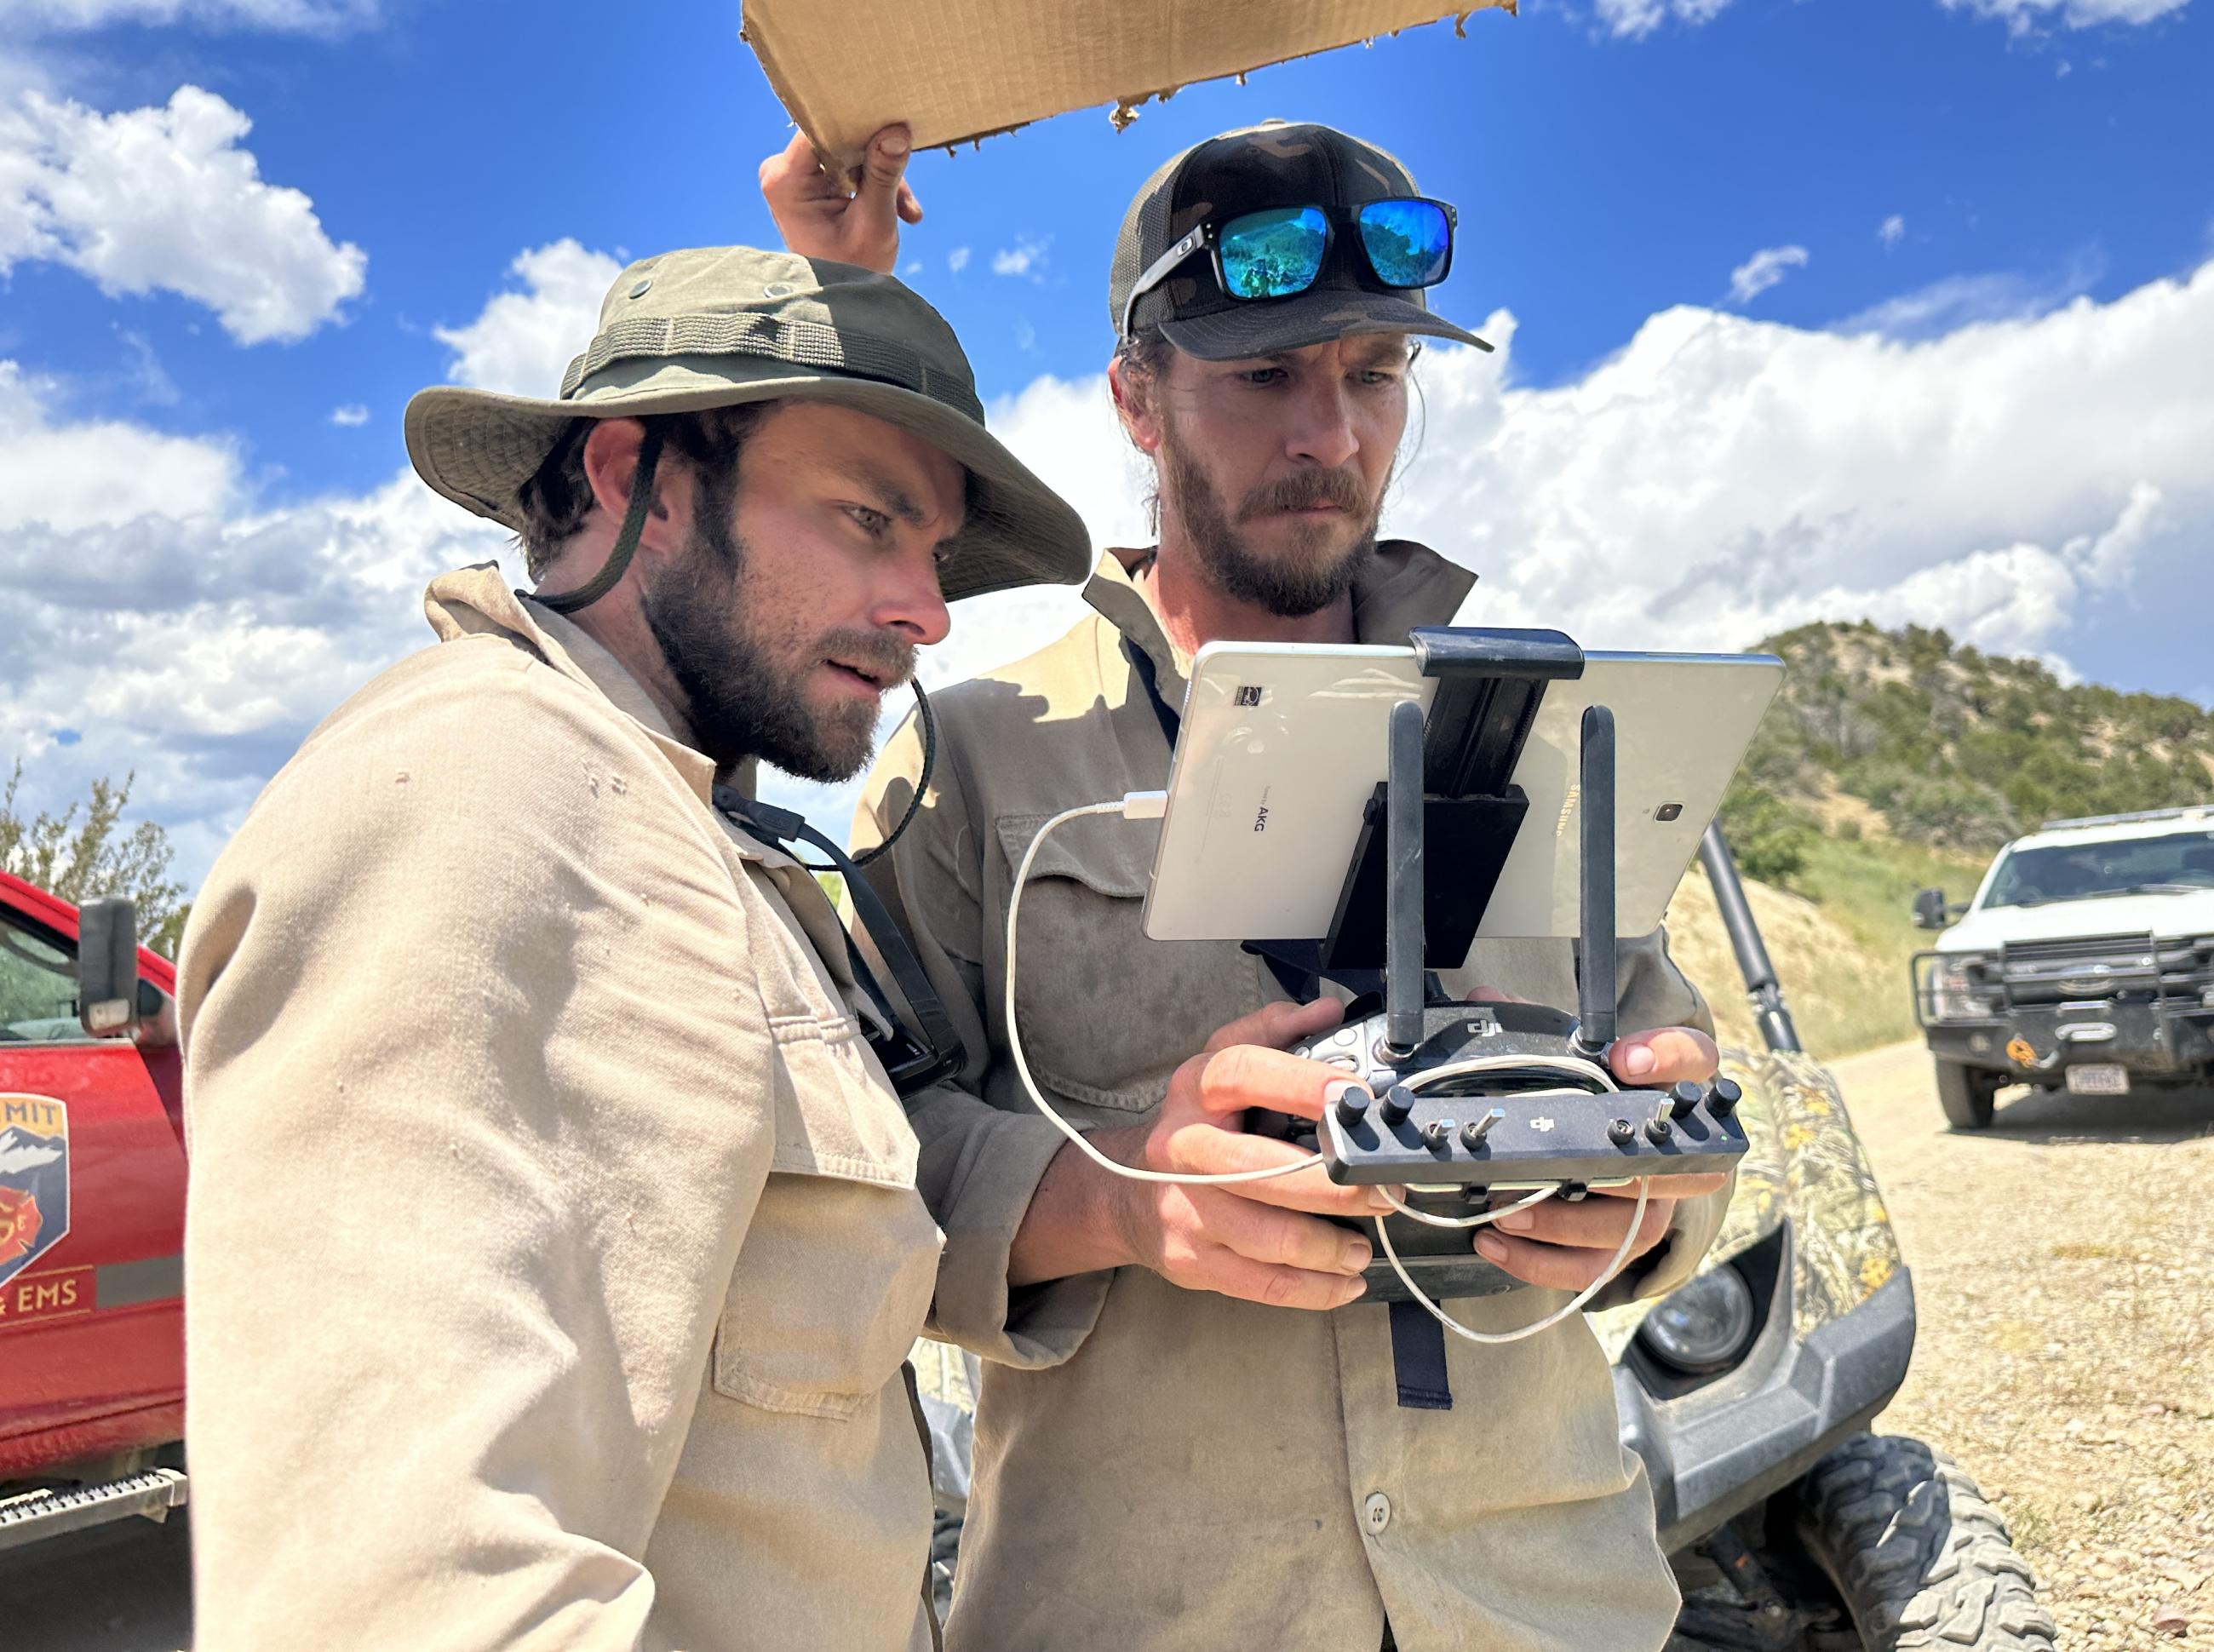 2 men look at a small monitor and controls for drone during firing operation